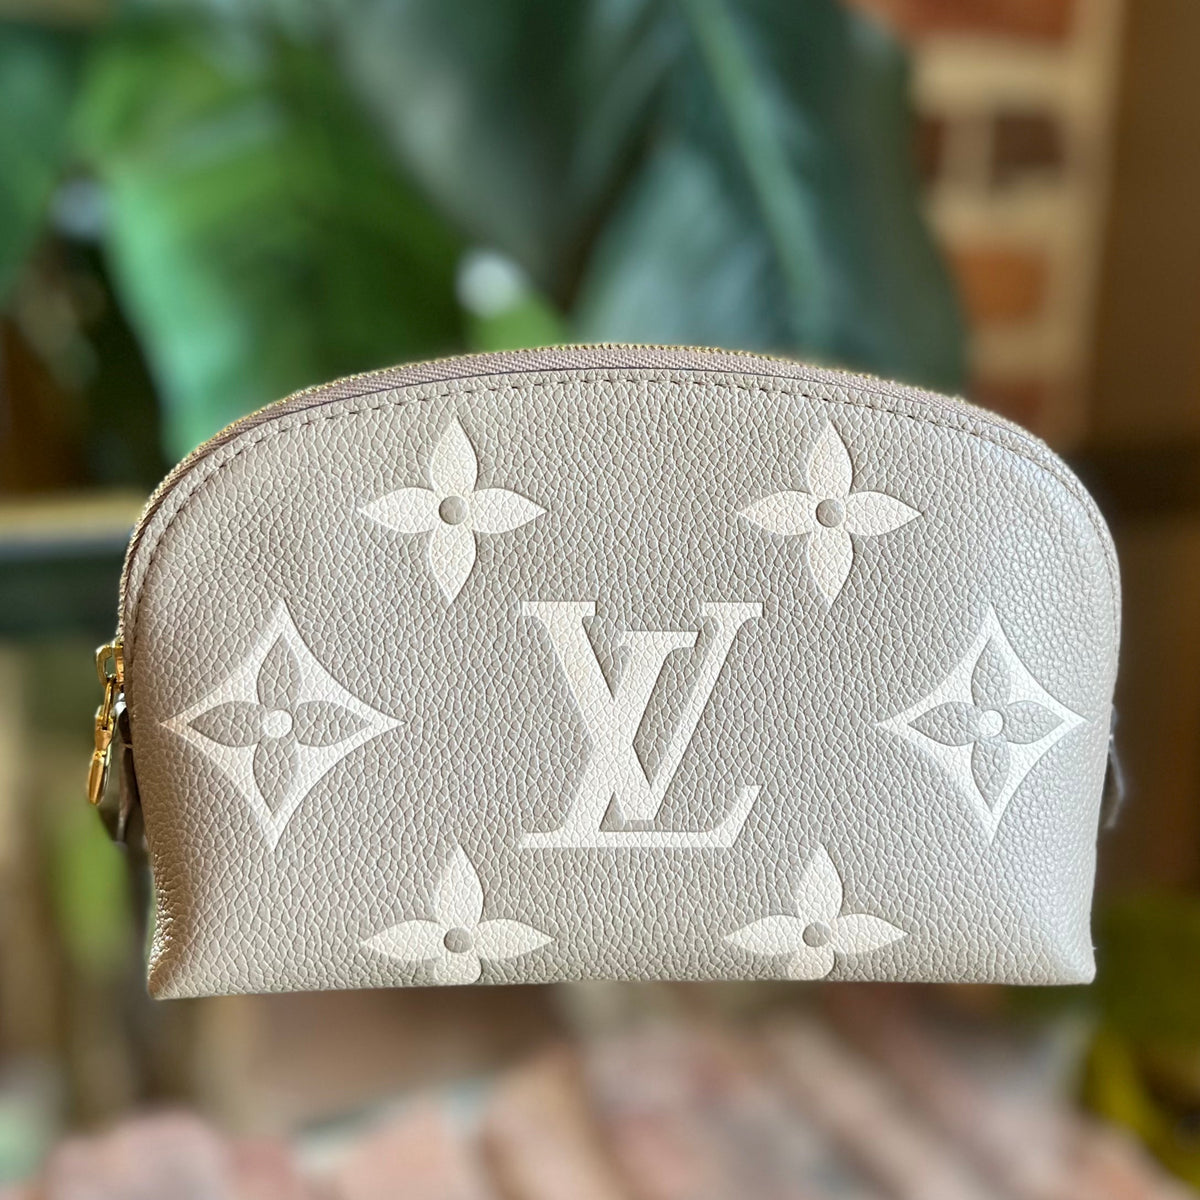 Products by Louis Vuitton: Cosmetic Pouch